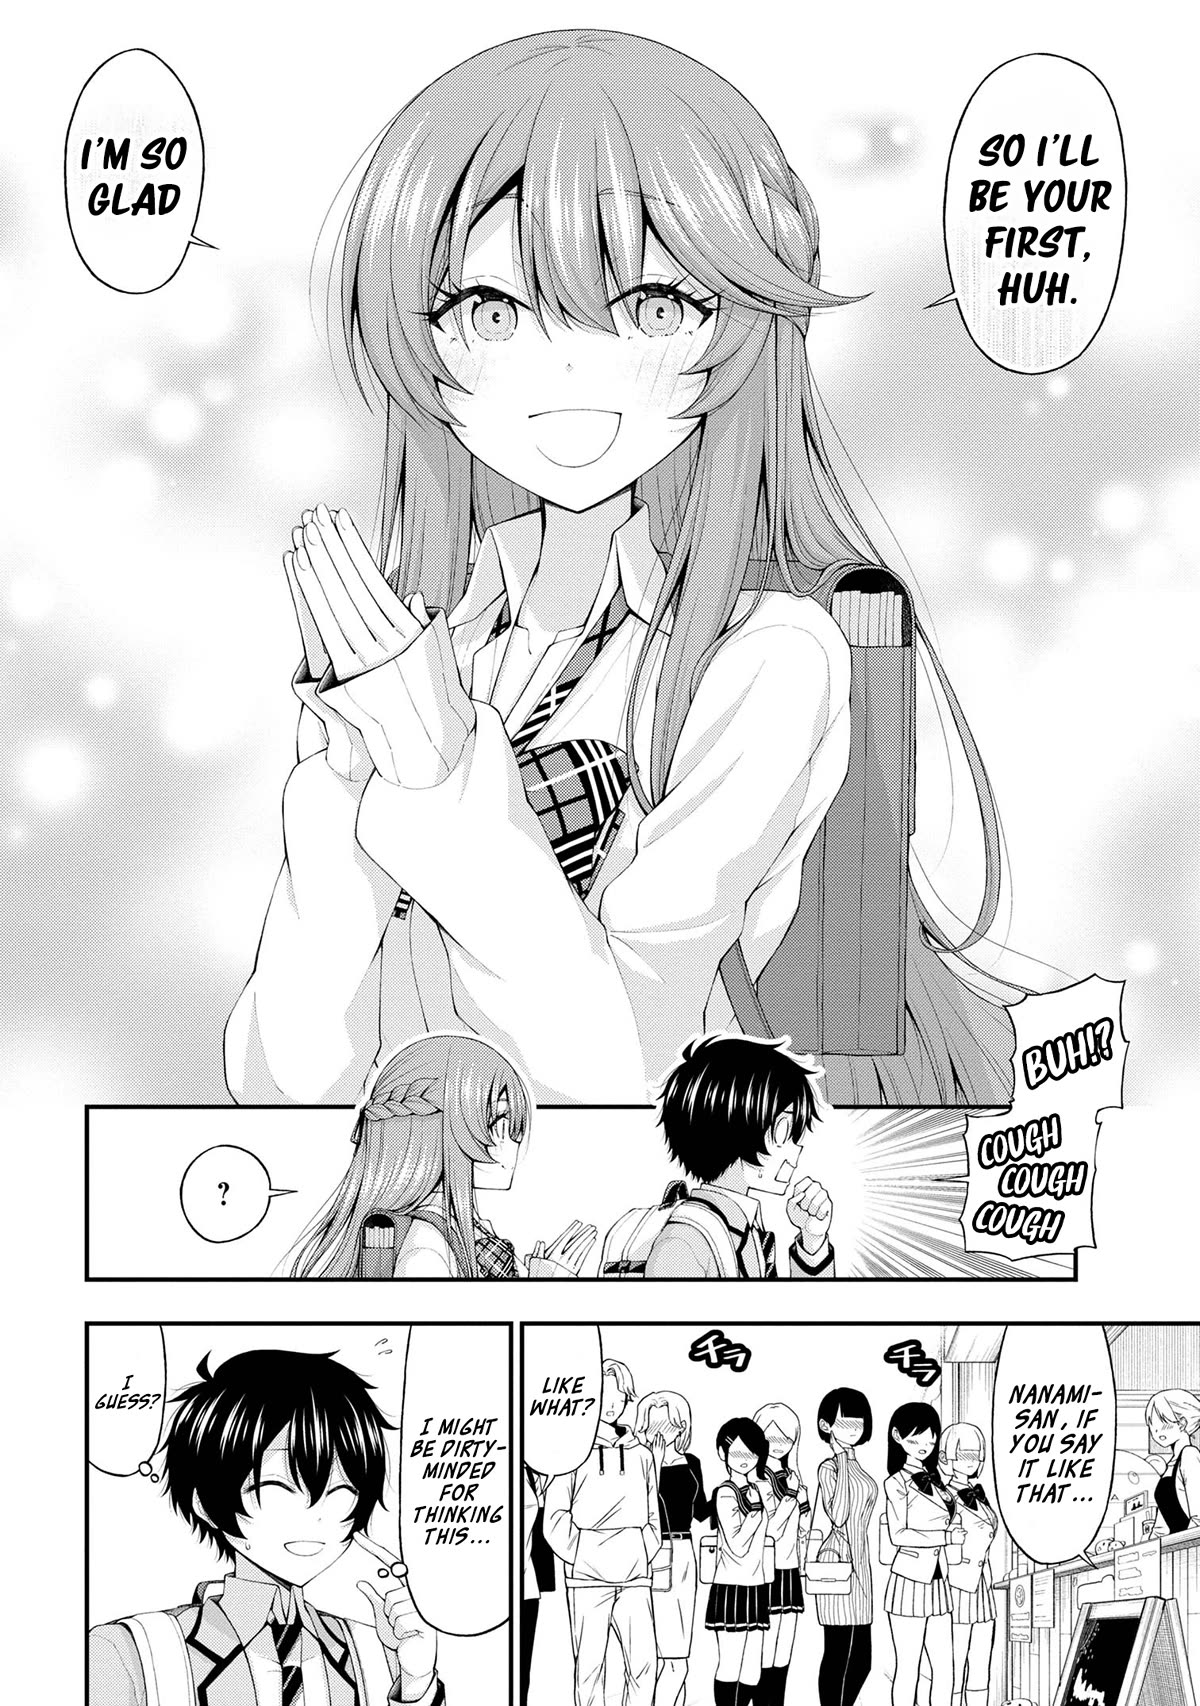 The Gal Who Was Meant to Confess to Me as a Game Punishment - chapter 14 - #2